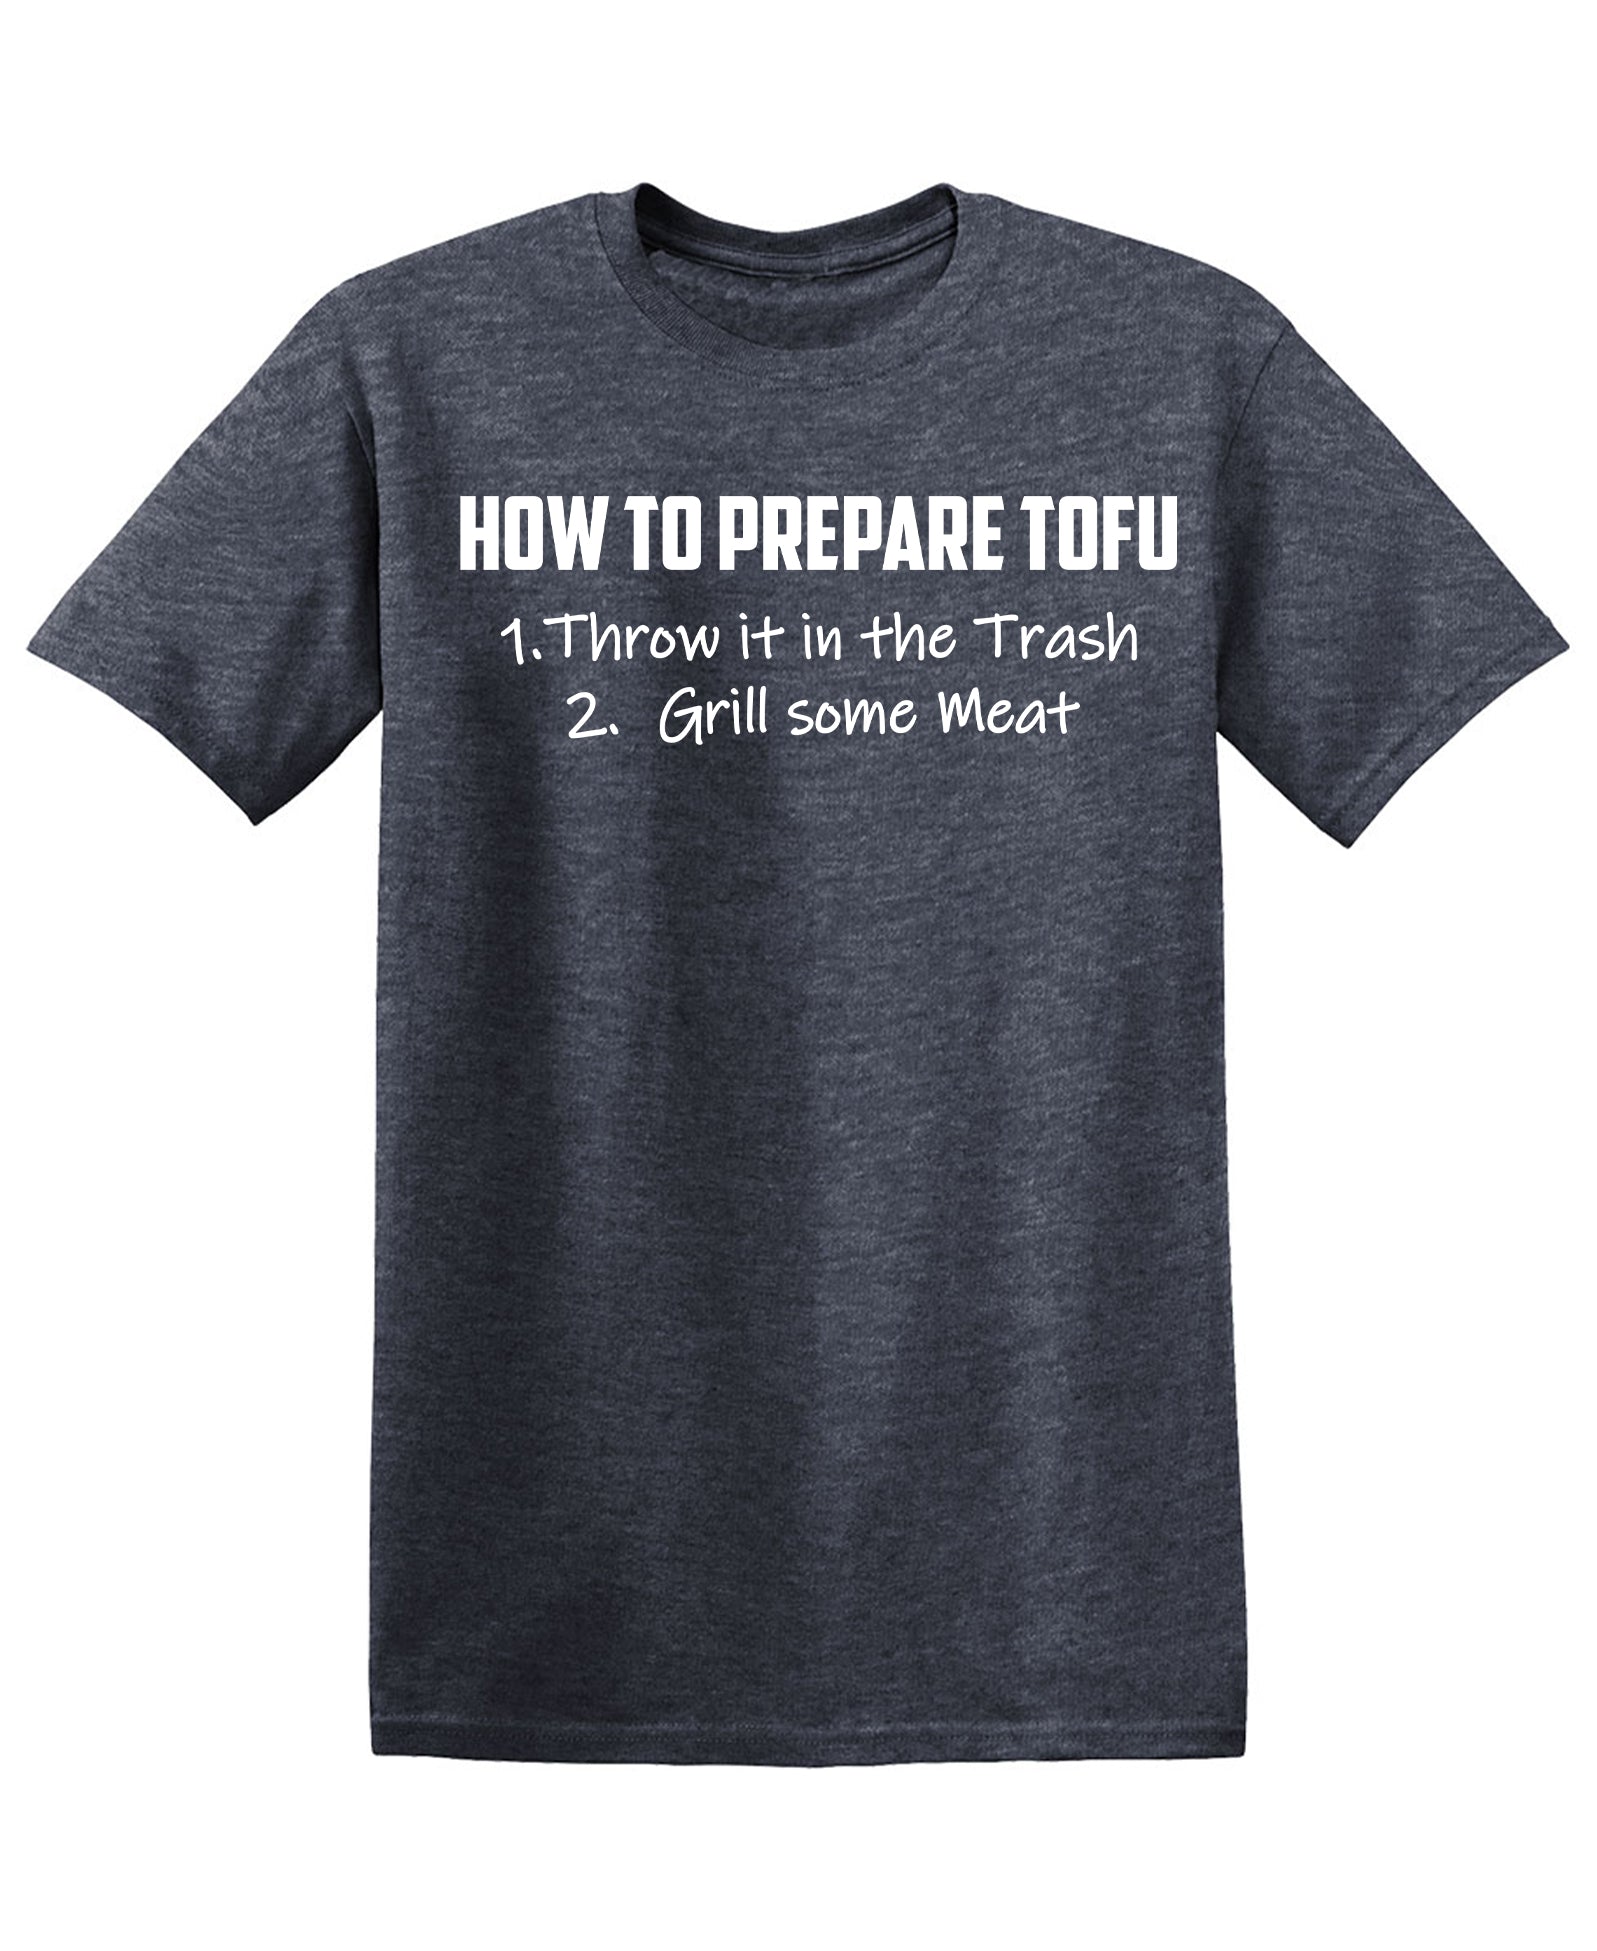 How to Prepare Tofu, Throw it in the Trash Funny Tee - Funny T Shirts & Graphic Tees